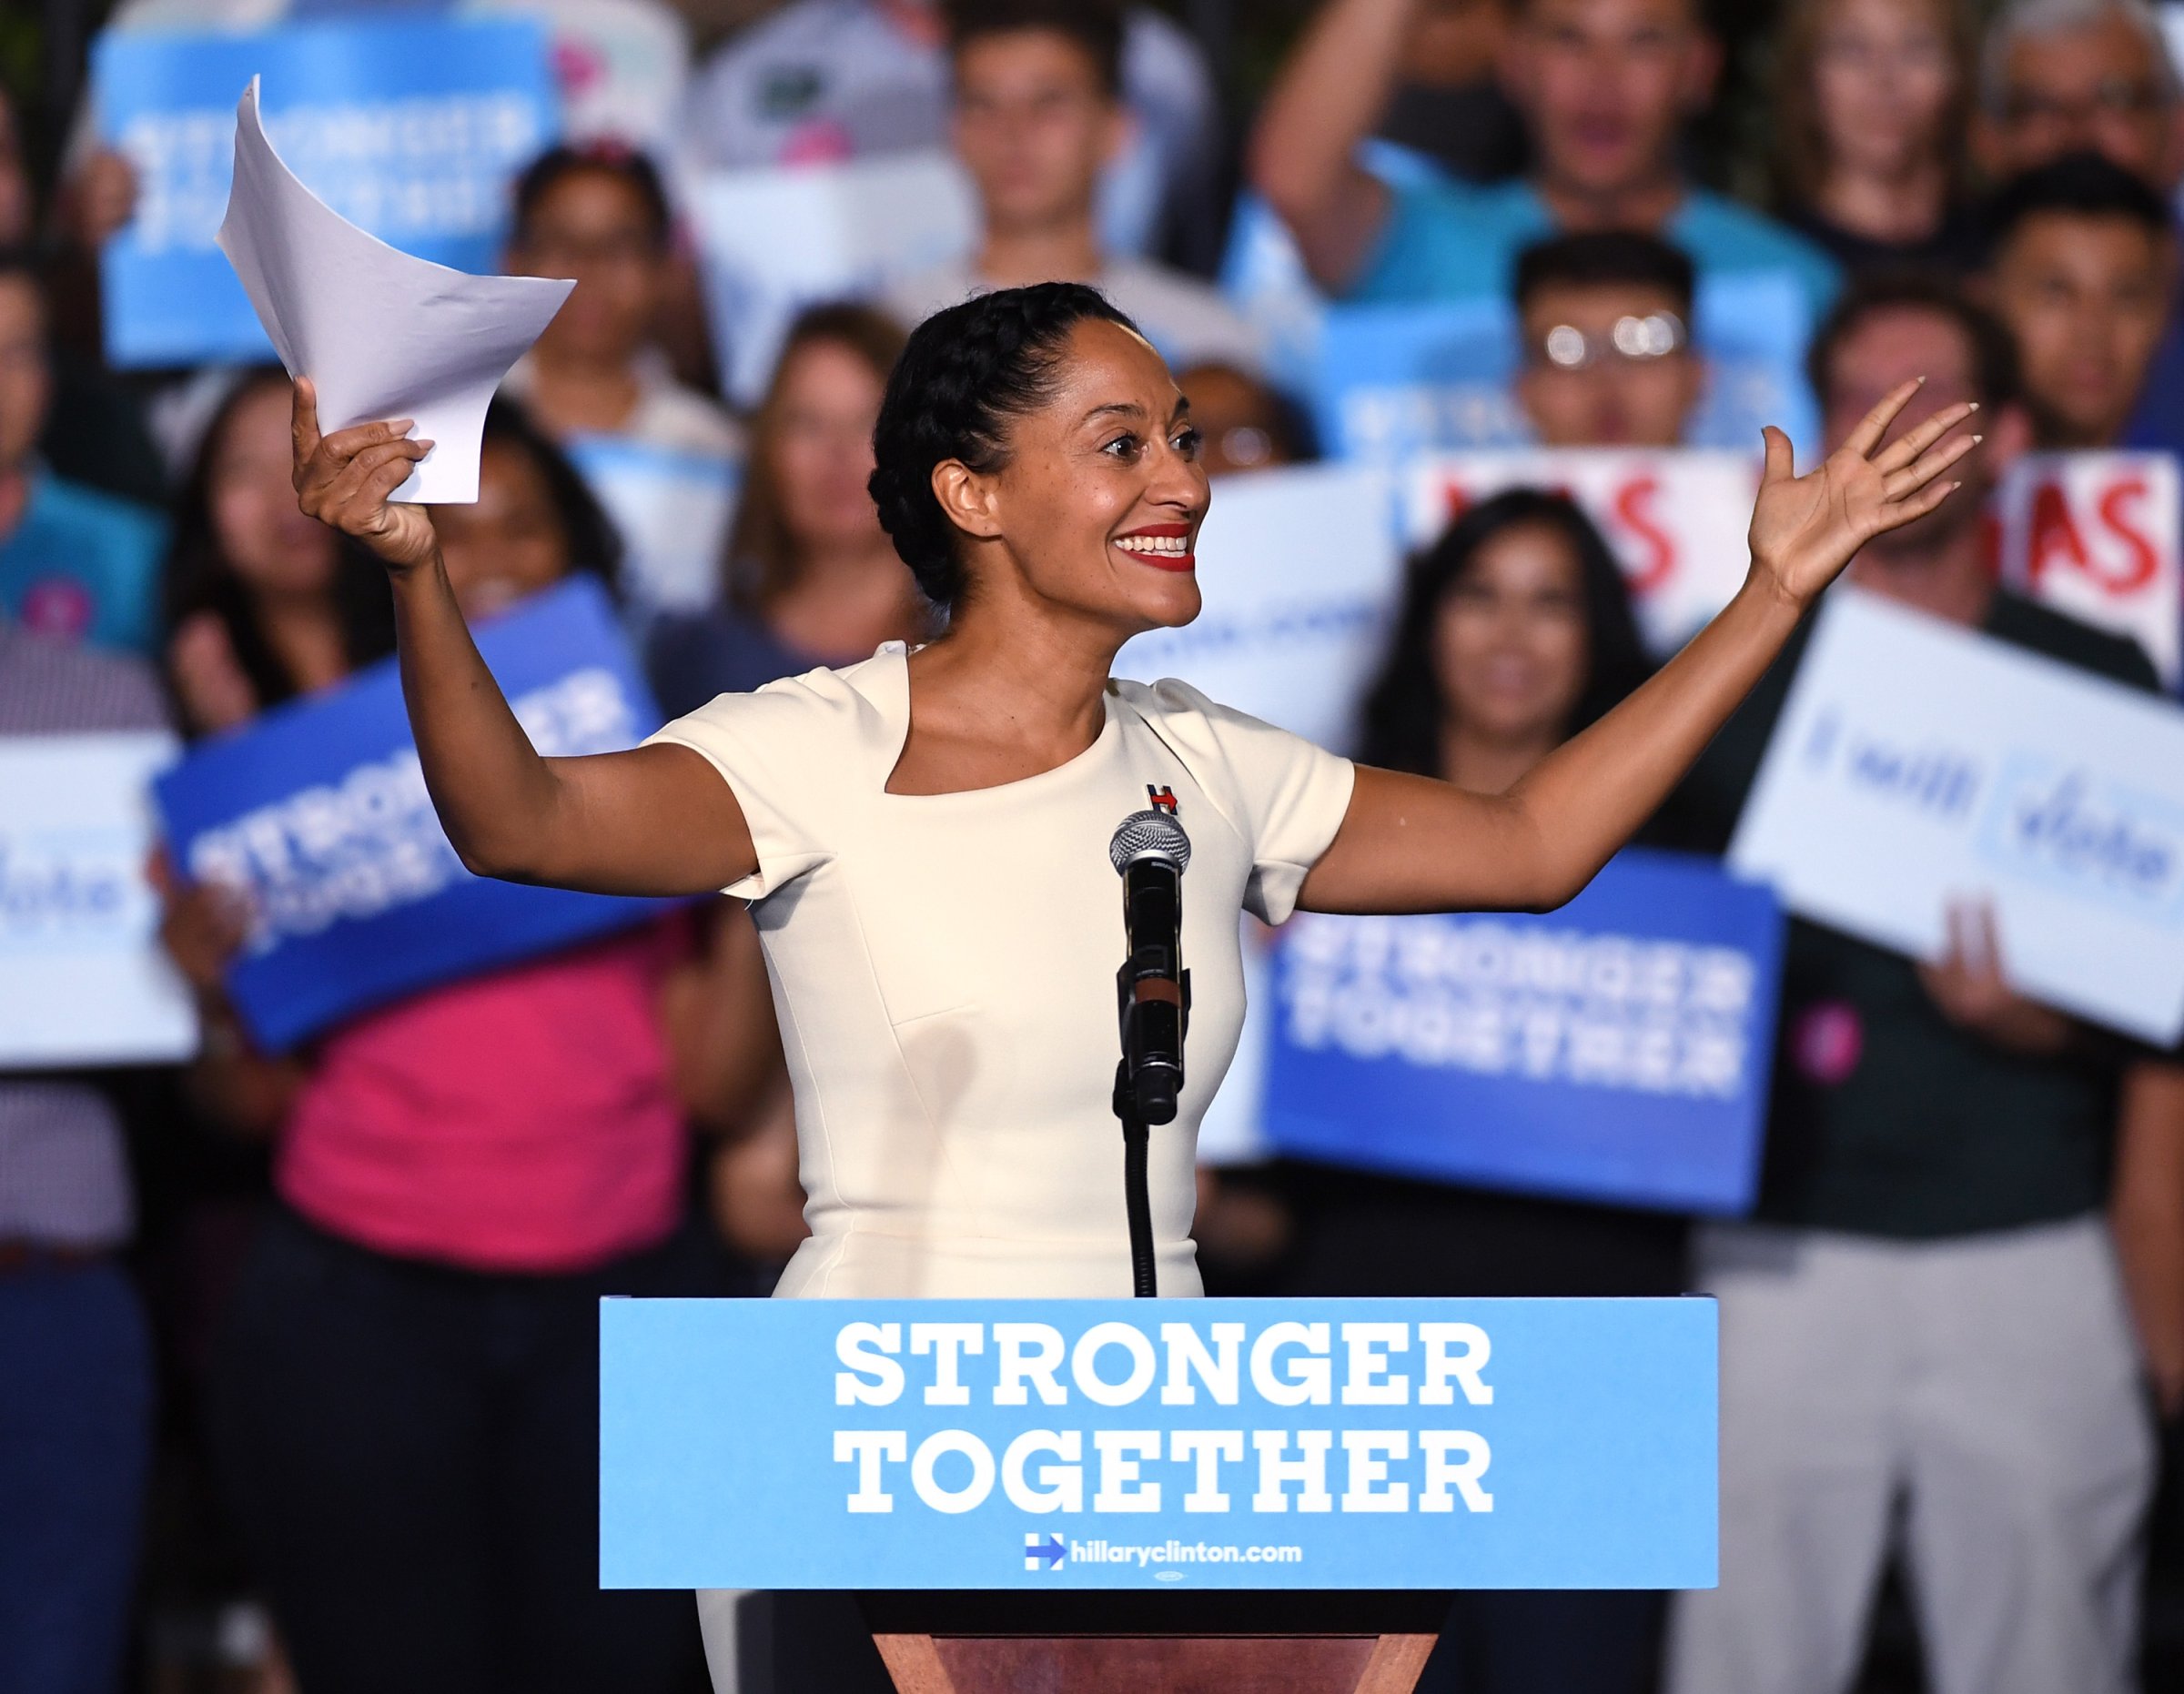 Actress Tracee Ellis Ross introduces Democratic presidential nominee Hillary Clinton at a campaign rally at The Smith Center for the Performing Arts on October 12, 2016 in Las Vegas, Nevada.